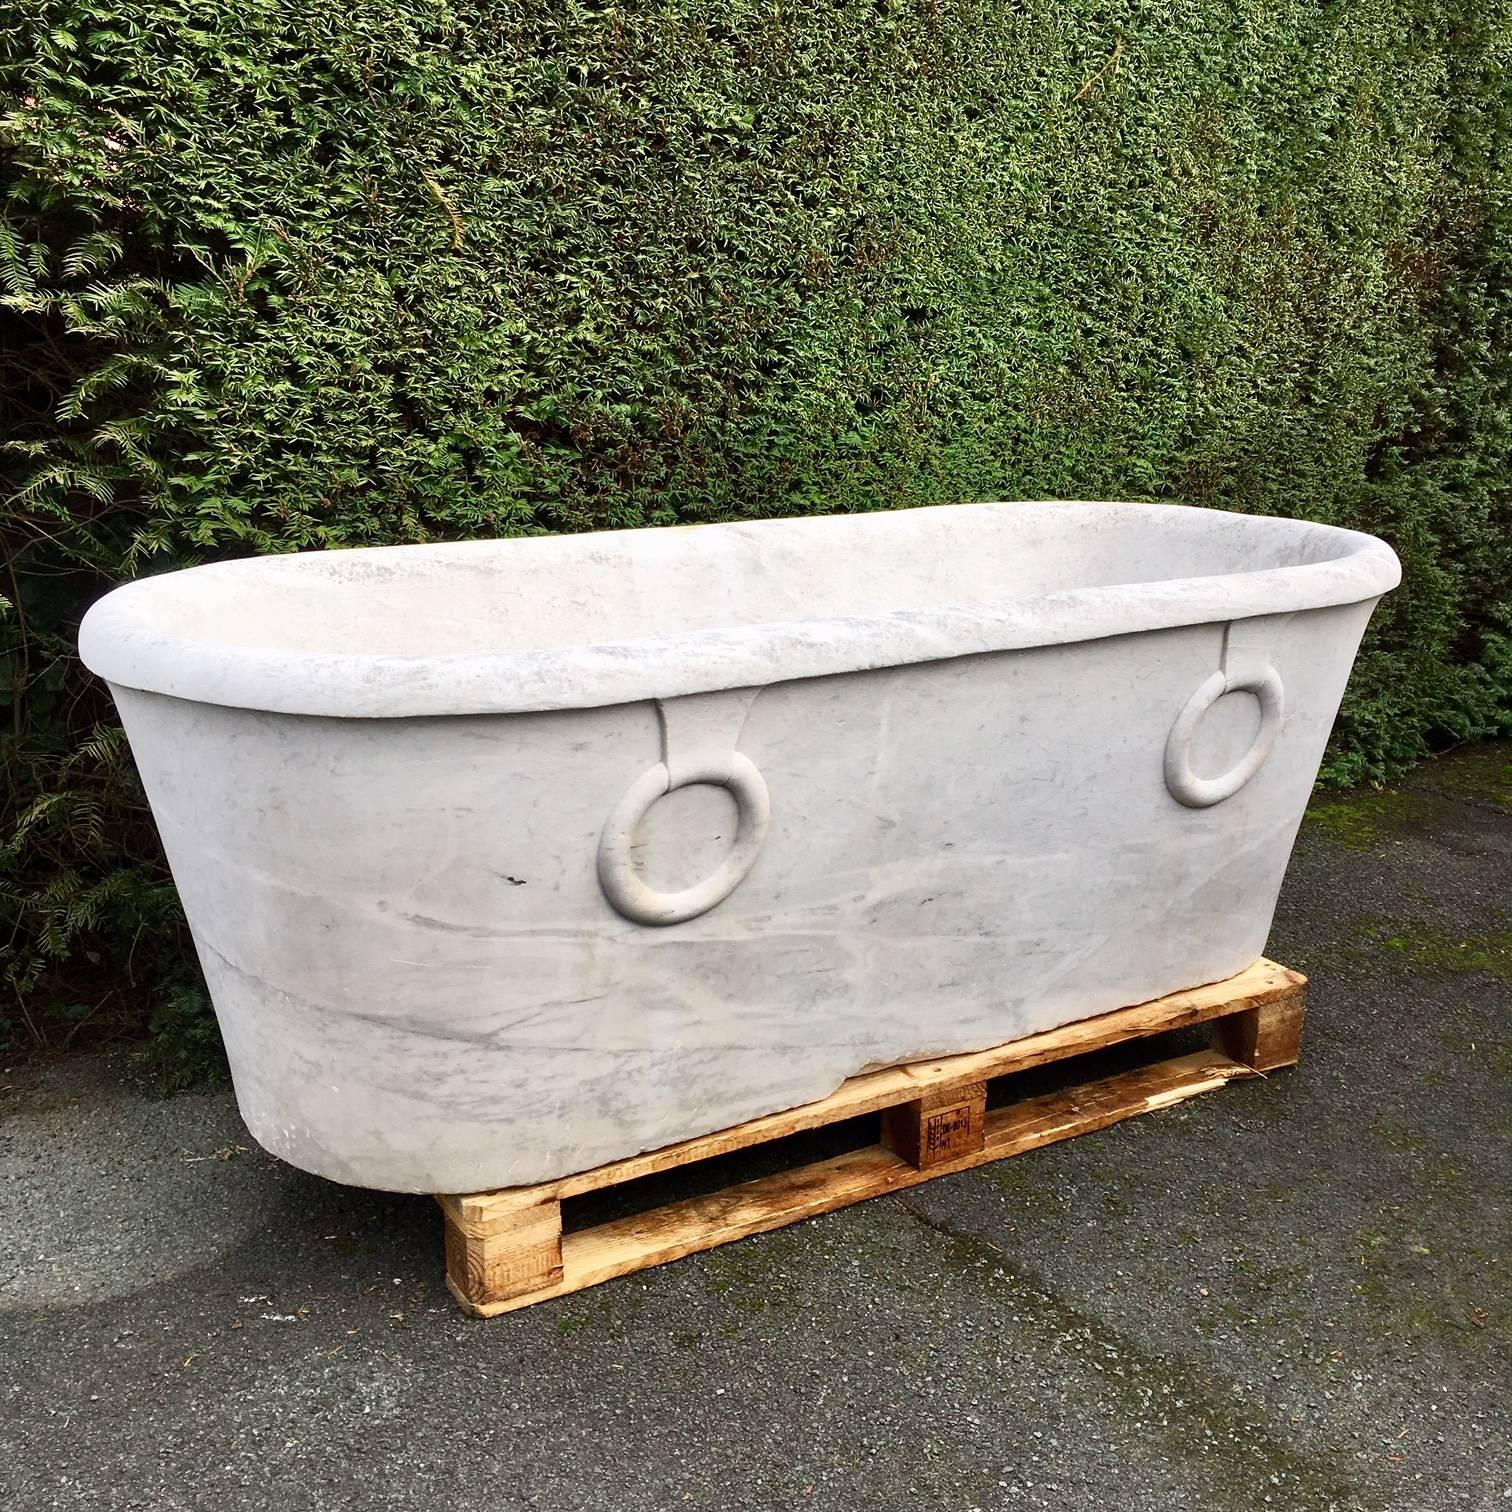 Antique marble bathtub, made in France in the 19th century. Is in a good condition and can be used for many years. Please note the small damage in the plinth, this can be restored if you wish.